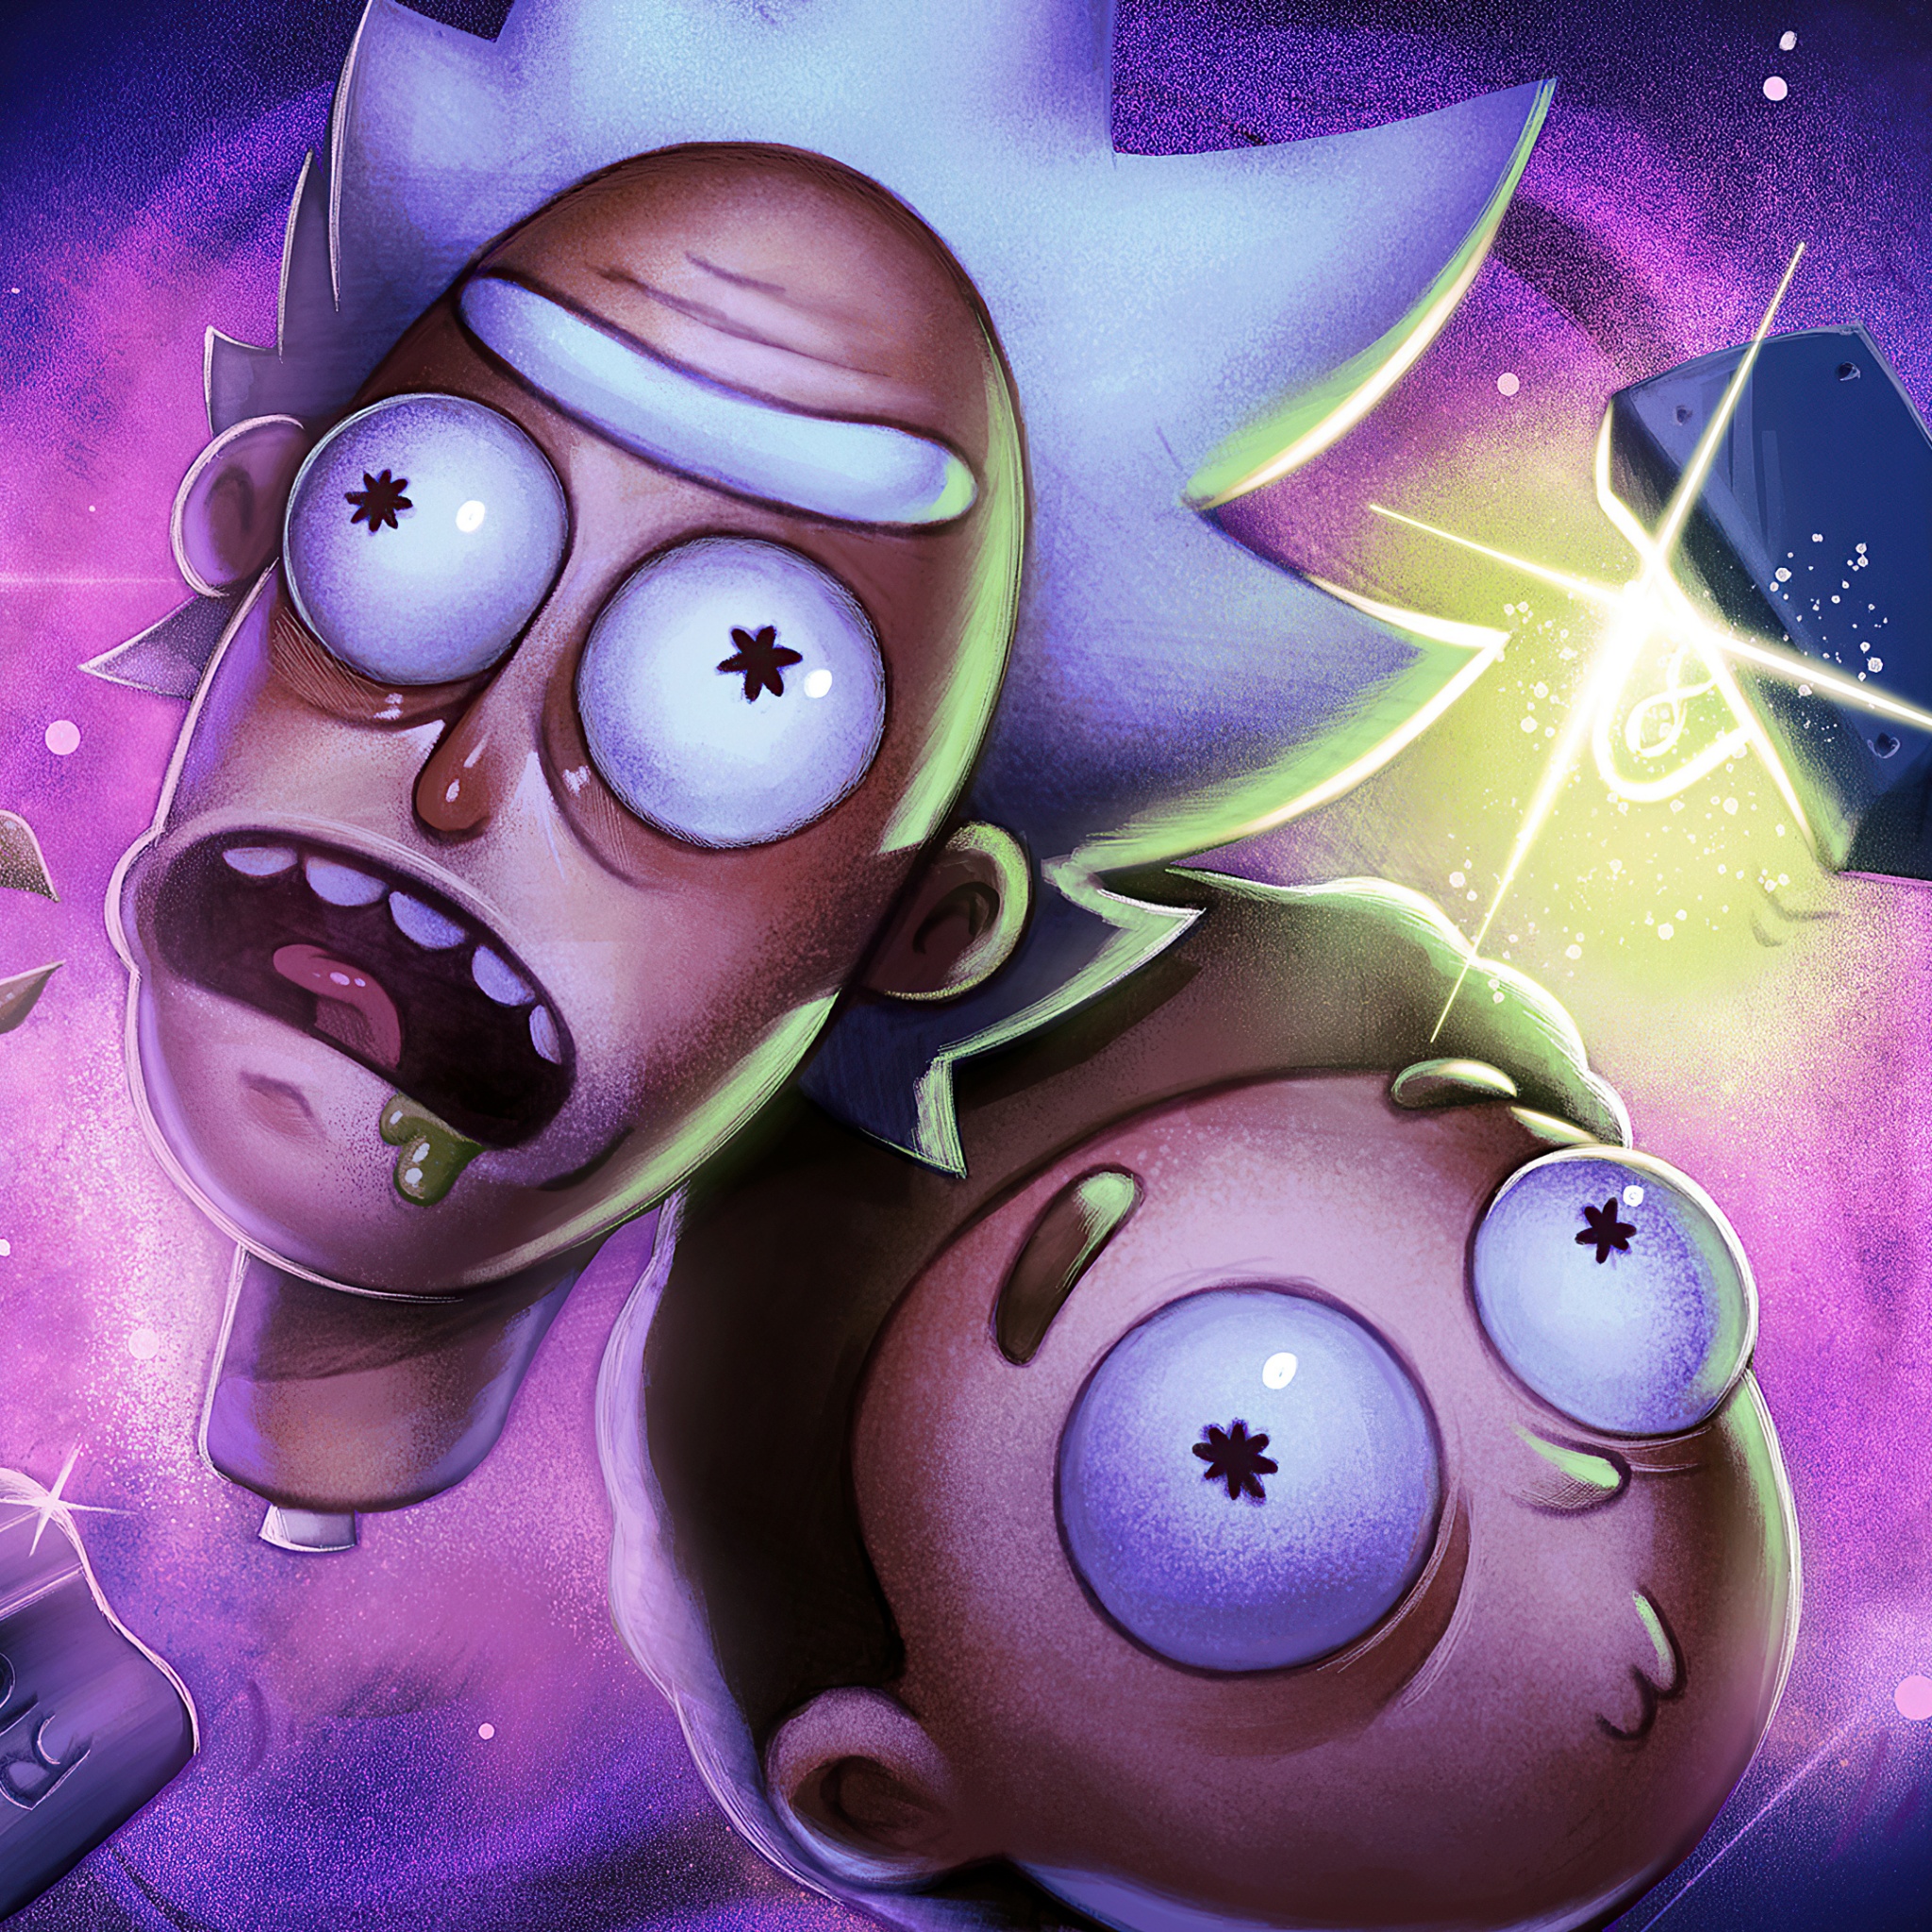 Cool Rick and Morty Wallpapers  HD Backgrounds For Fans  AMJ